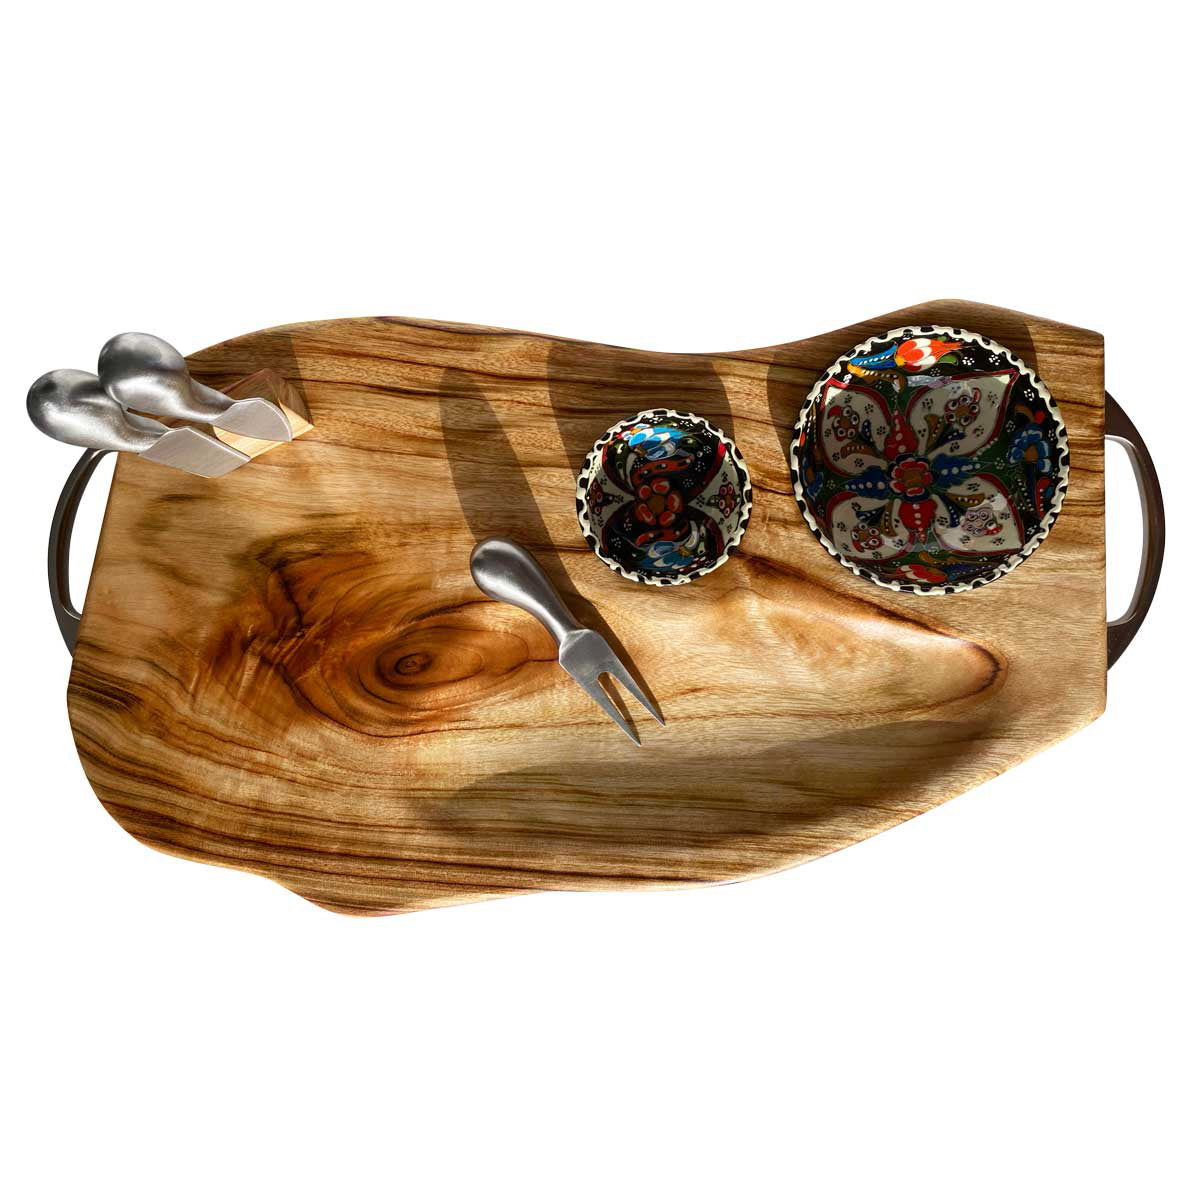 A stunning camphor laurel wooden food platter with stainless steel cheese tools and one small and one medium hand-crafted Turkish bowl, ready to create a charcuterie or cheese board.